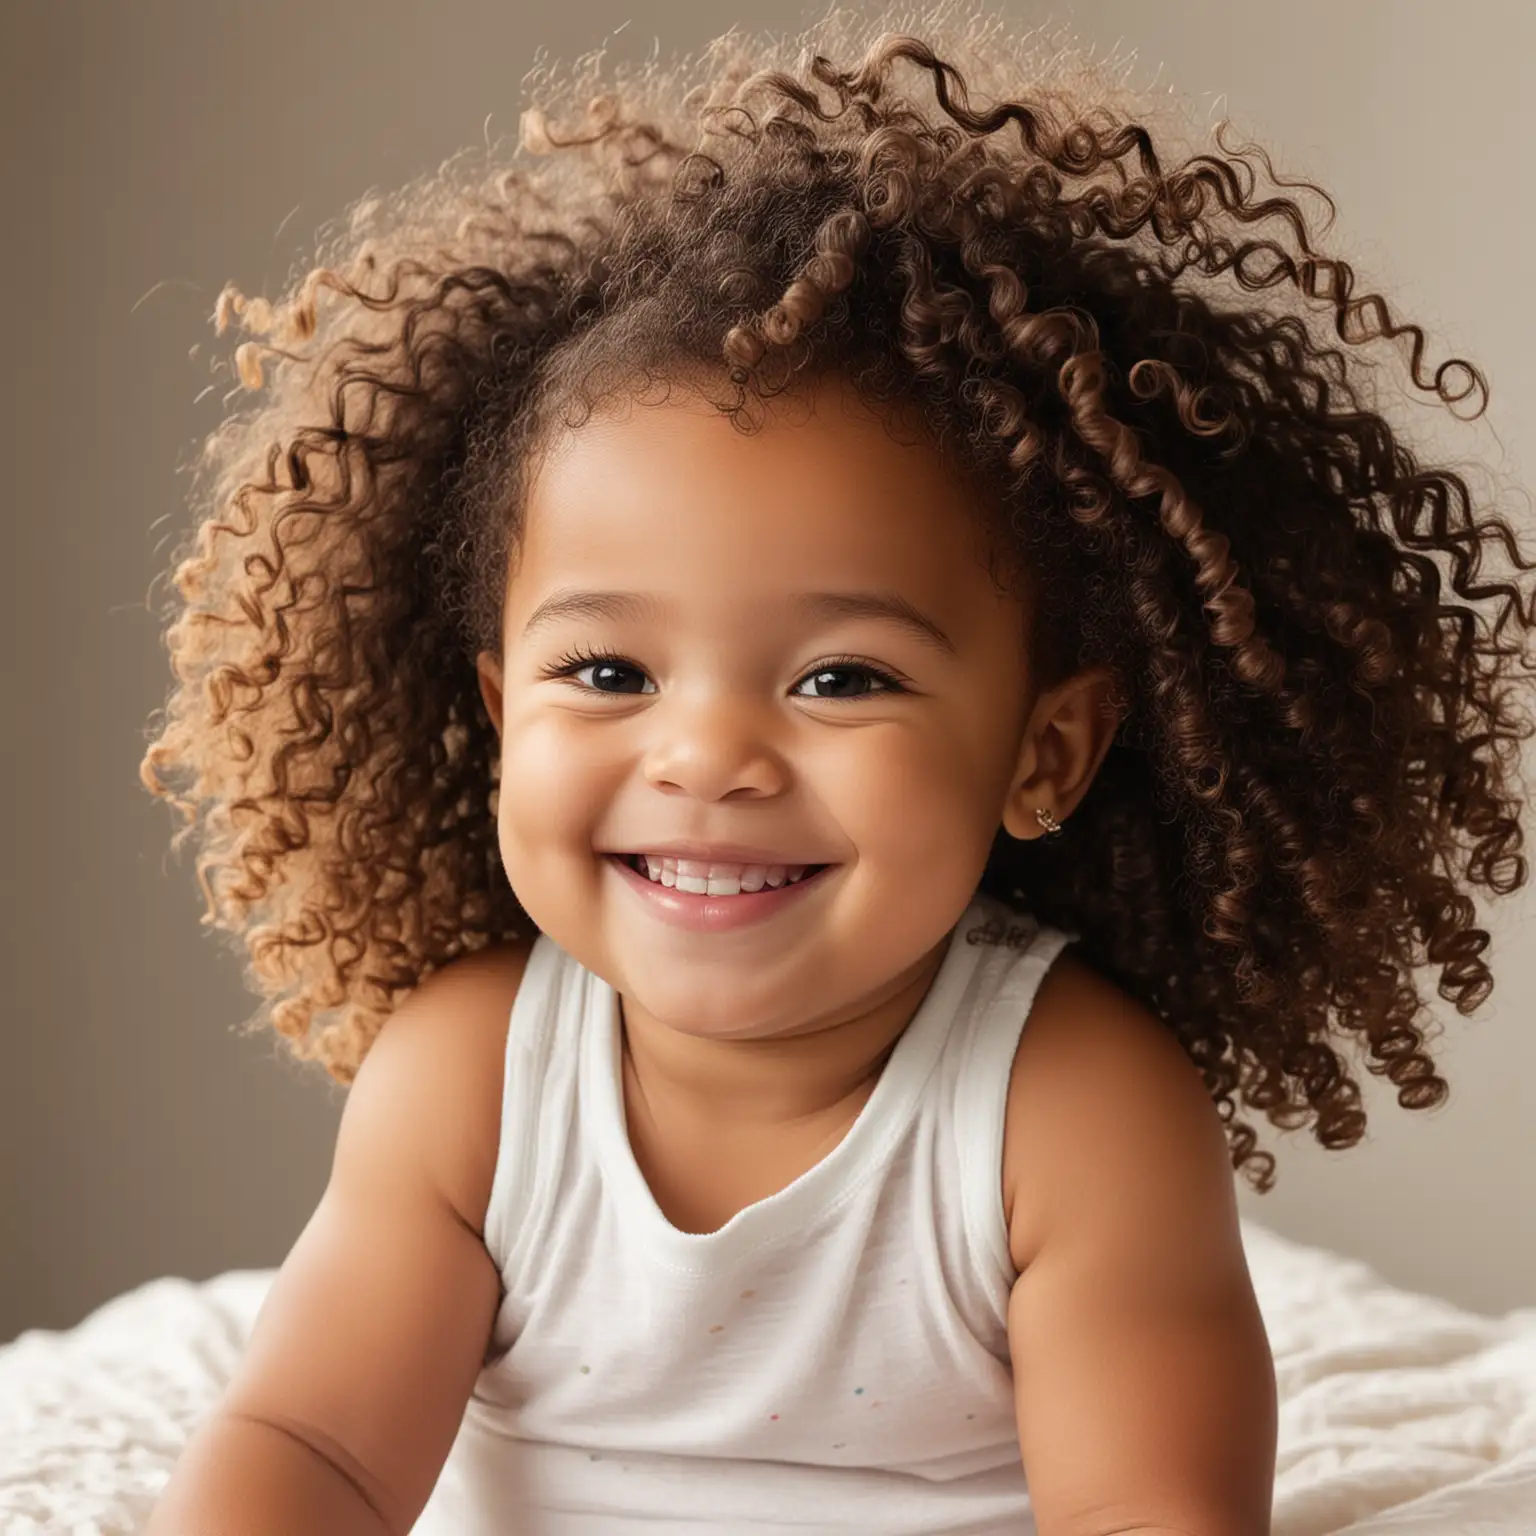 Joyful African American Baby with Curly Hair Smiling